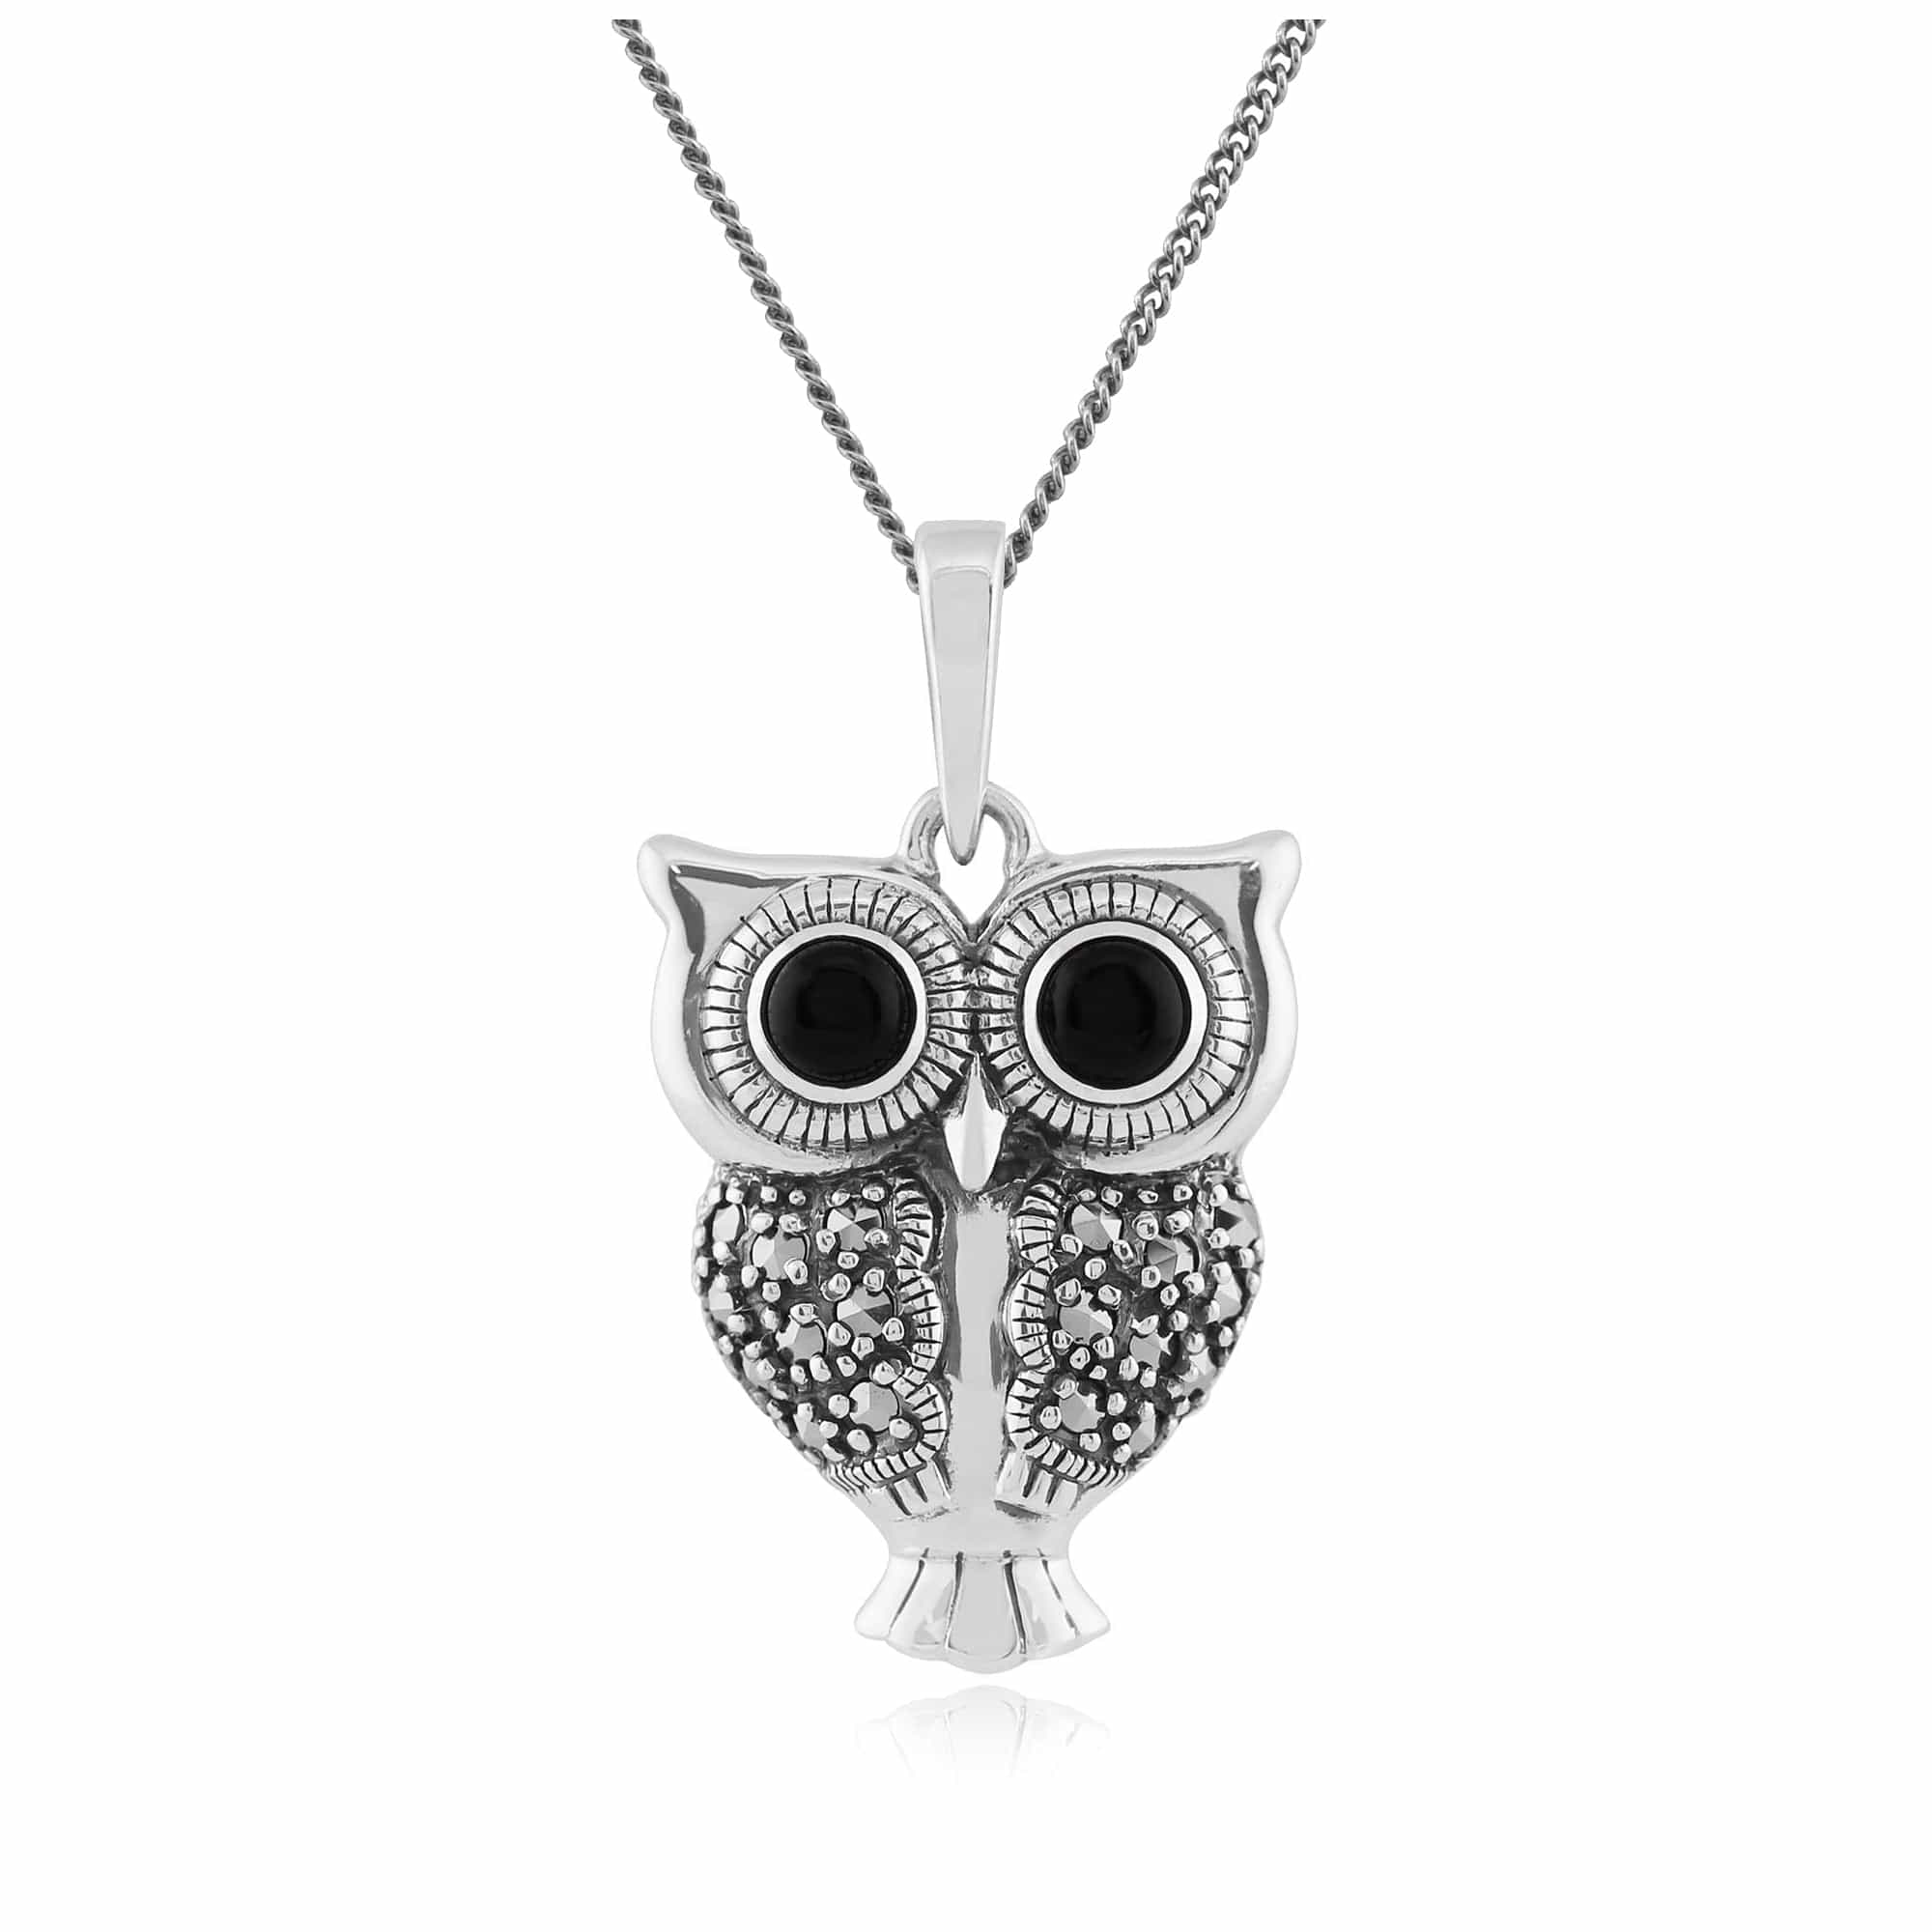 27427 Art Deco Style Round Black Onyx & Marcasite Owl Pendant in 925 Sterling Silver 1